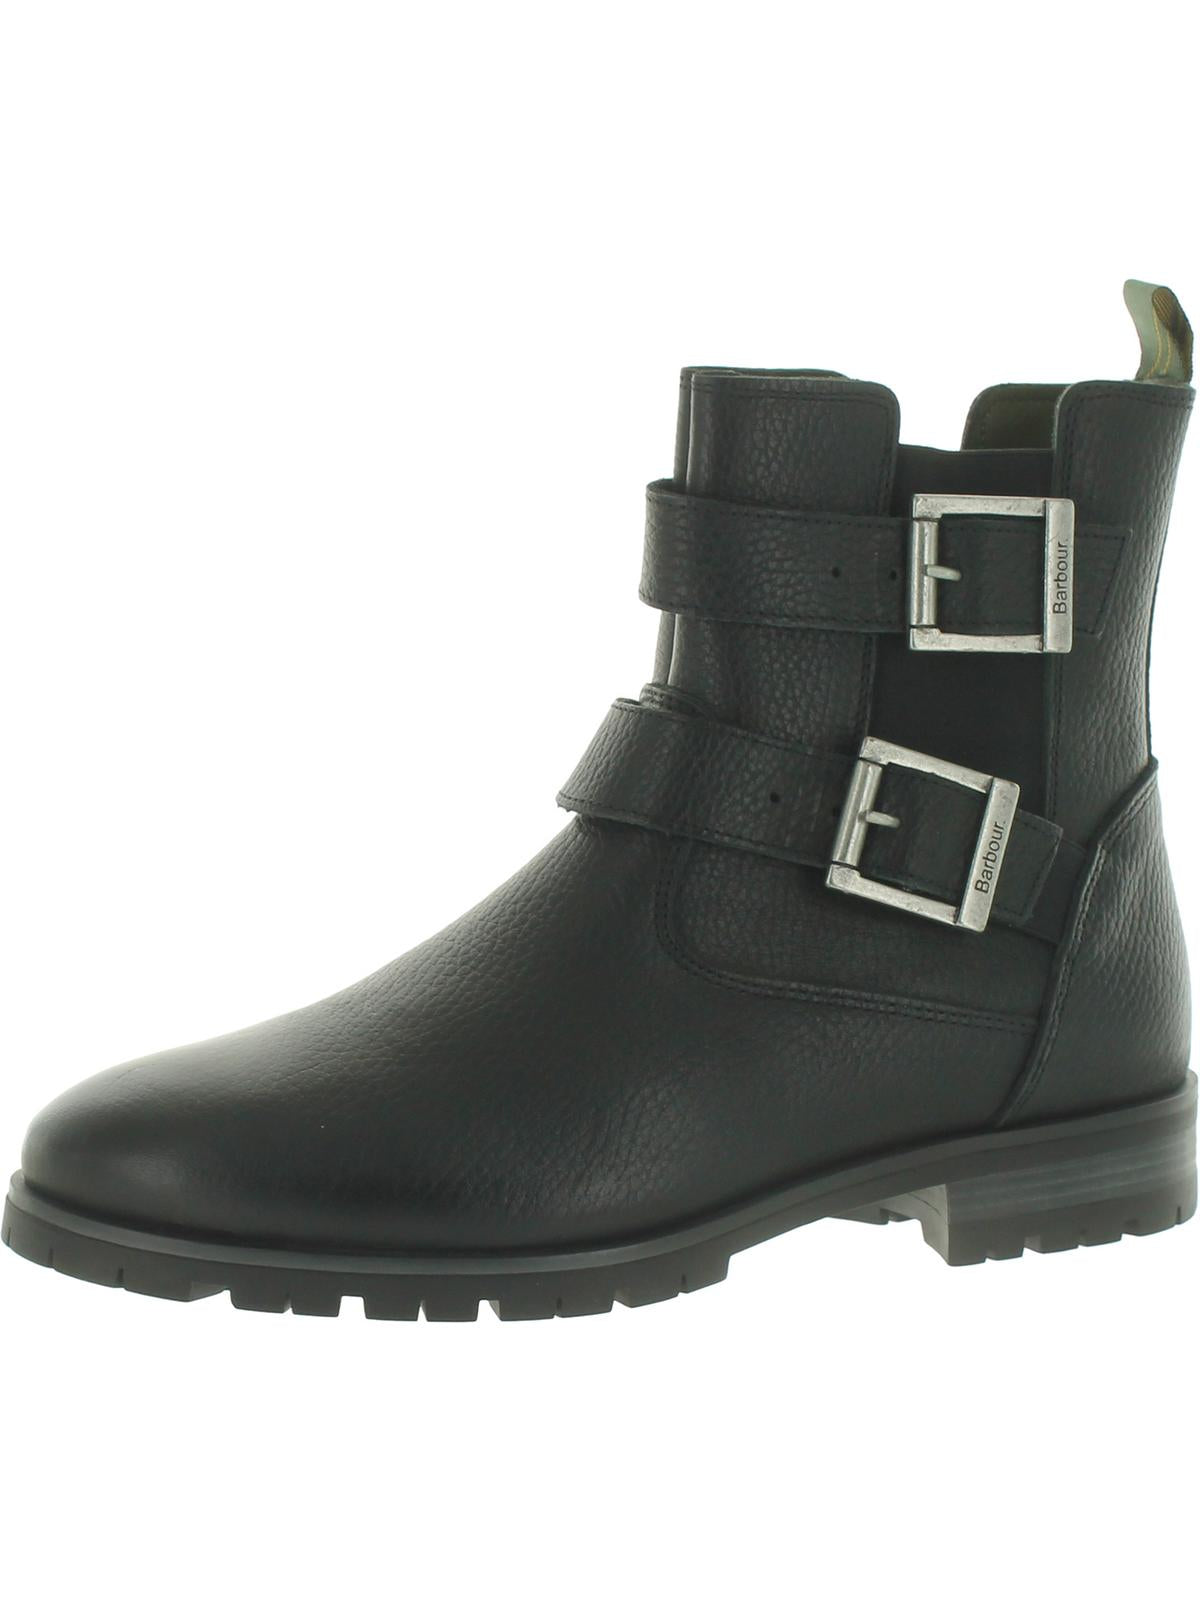 BARBOUR BARBOUR MARINA Womens LEATHER SHORT Ankle Boots